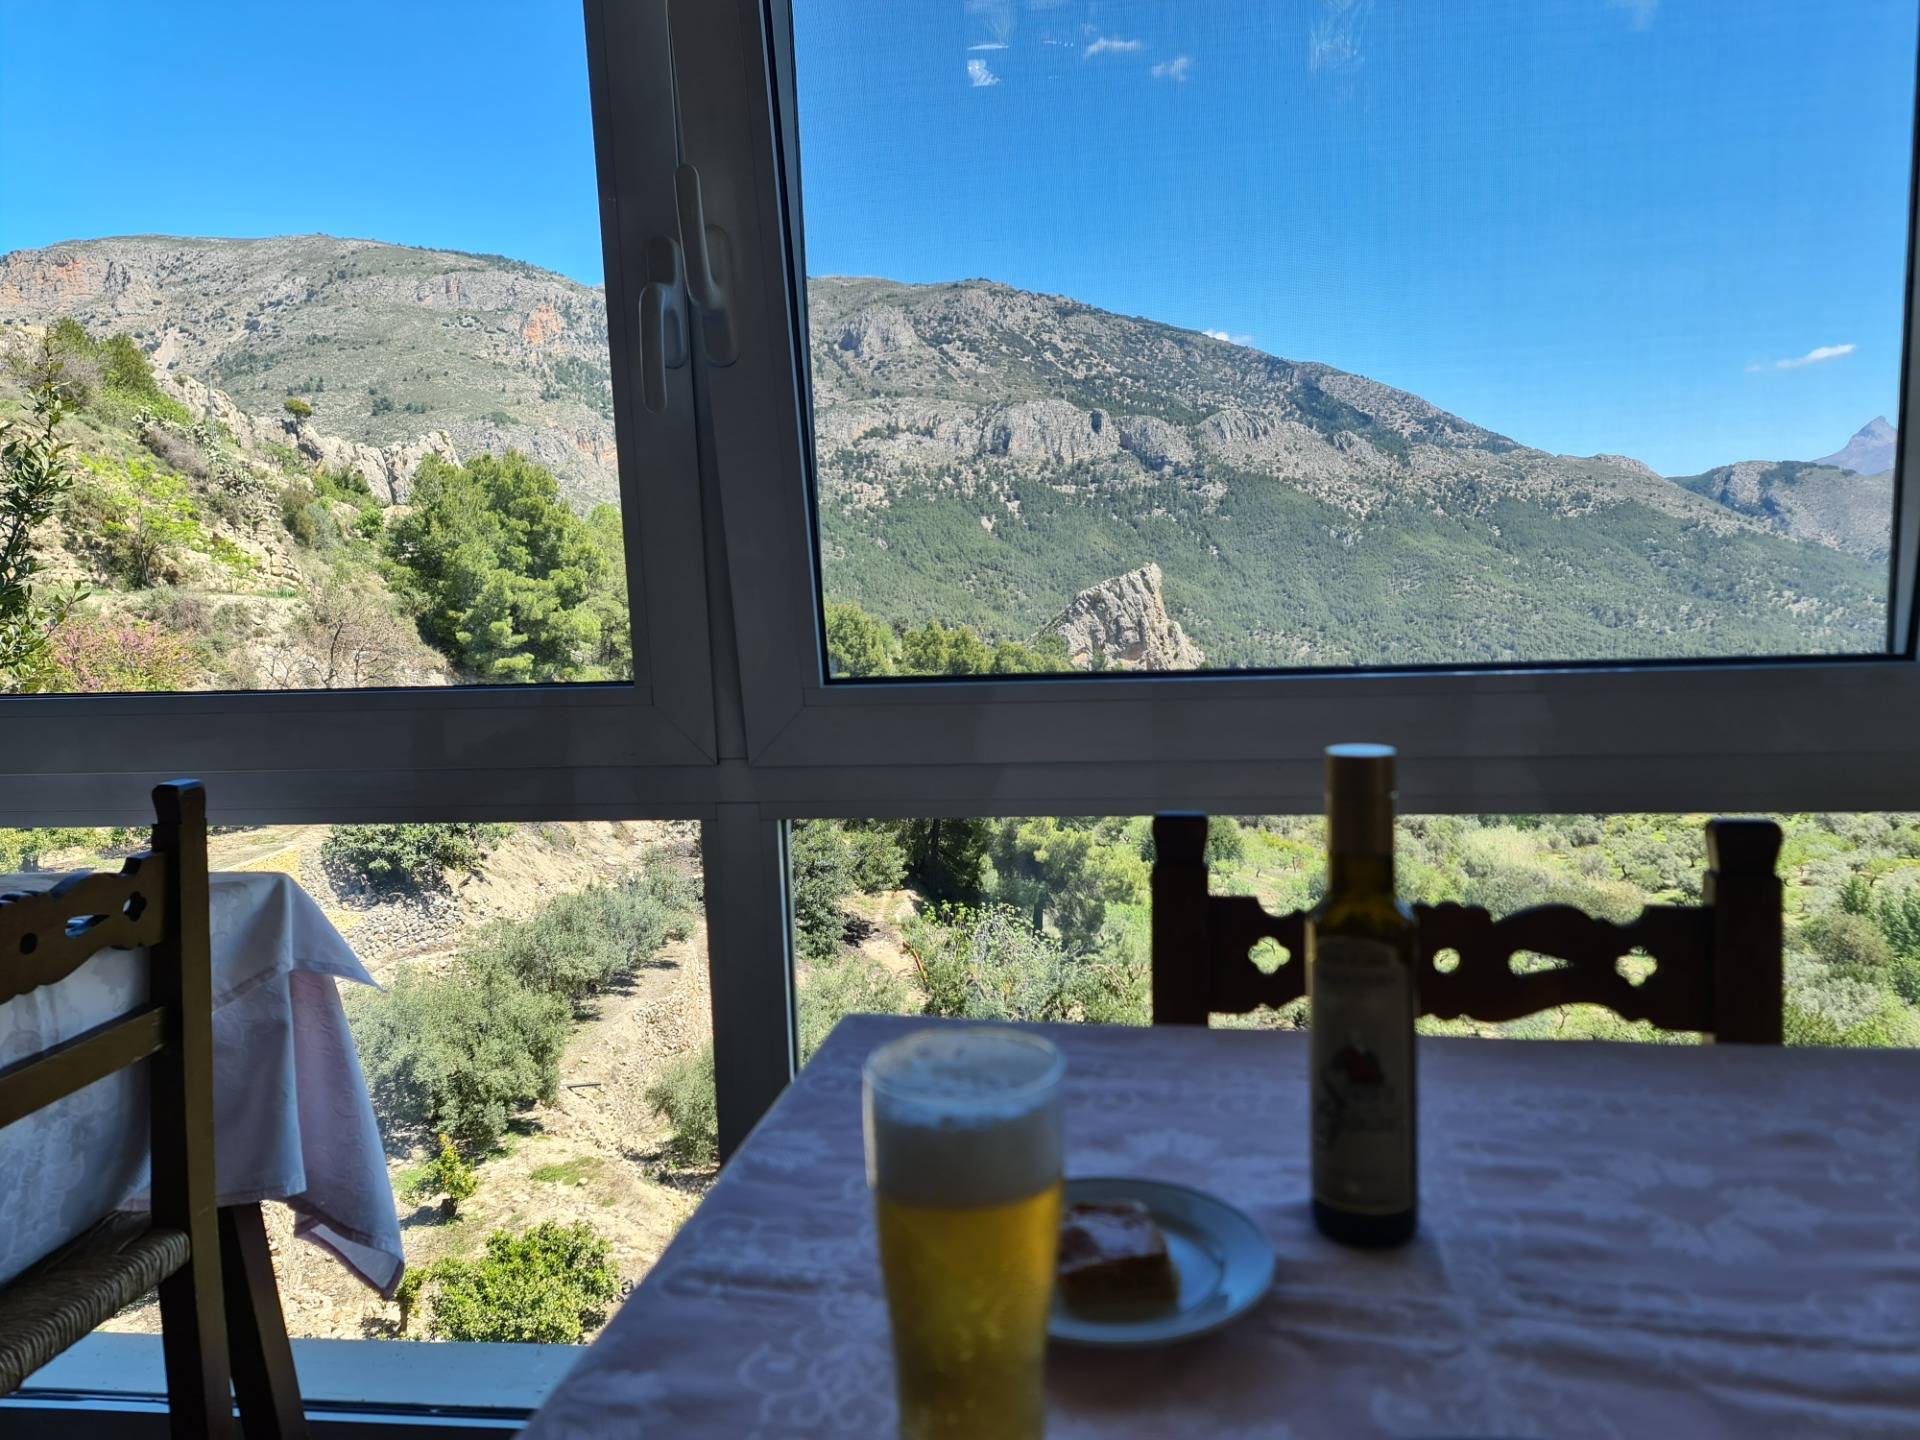 Views from my table and a glass of beer (€2.50).